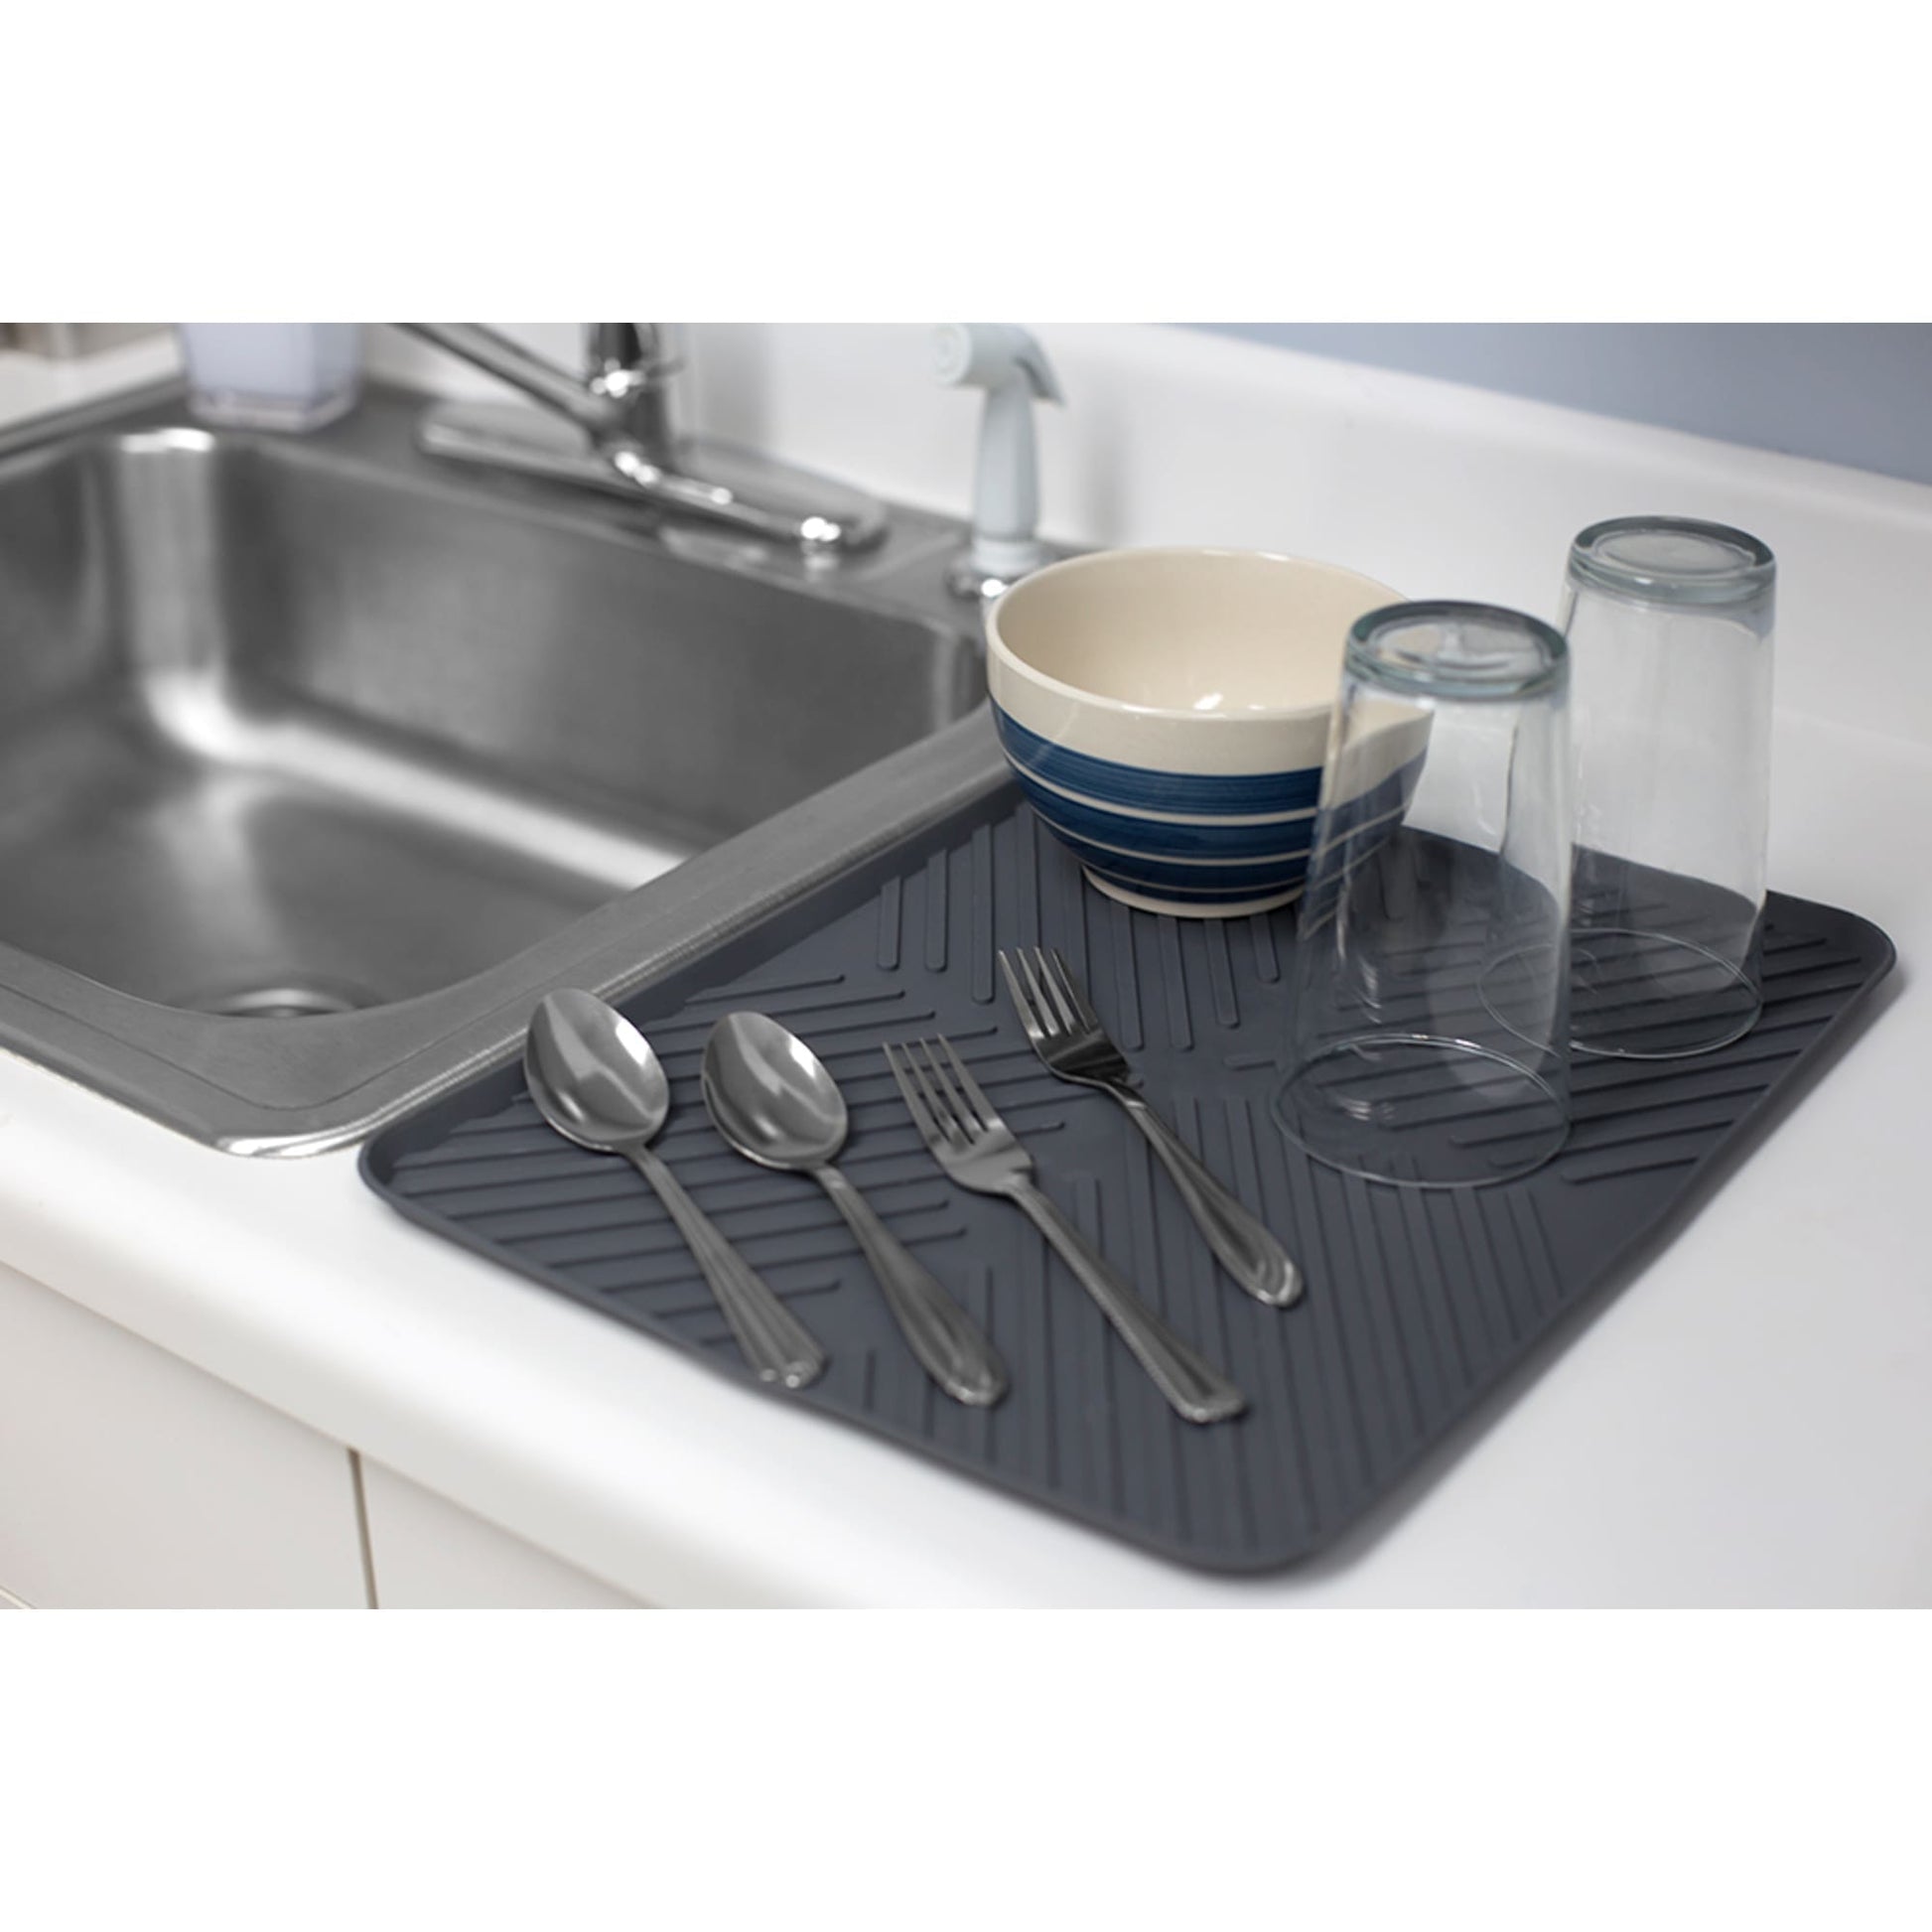 Draining Board Mats,Dish Drying Mat Silicone,Non-Slip Dish Drainer Draining  Board Rack Mat,Heat Resistant Sink Mat for Kitchen Large 16x12 inches Grey  